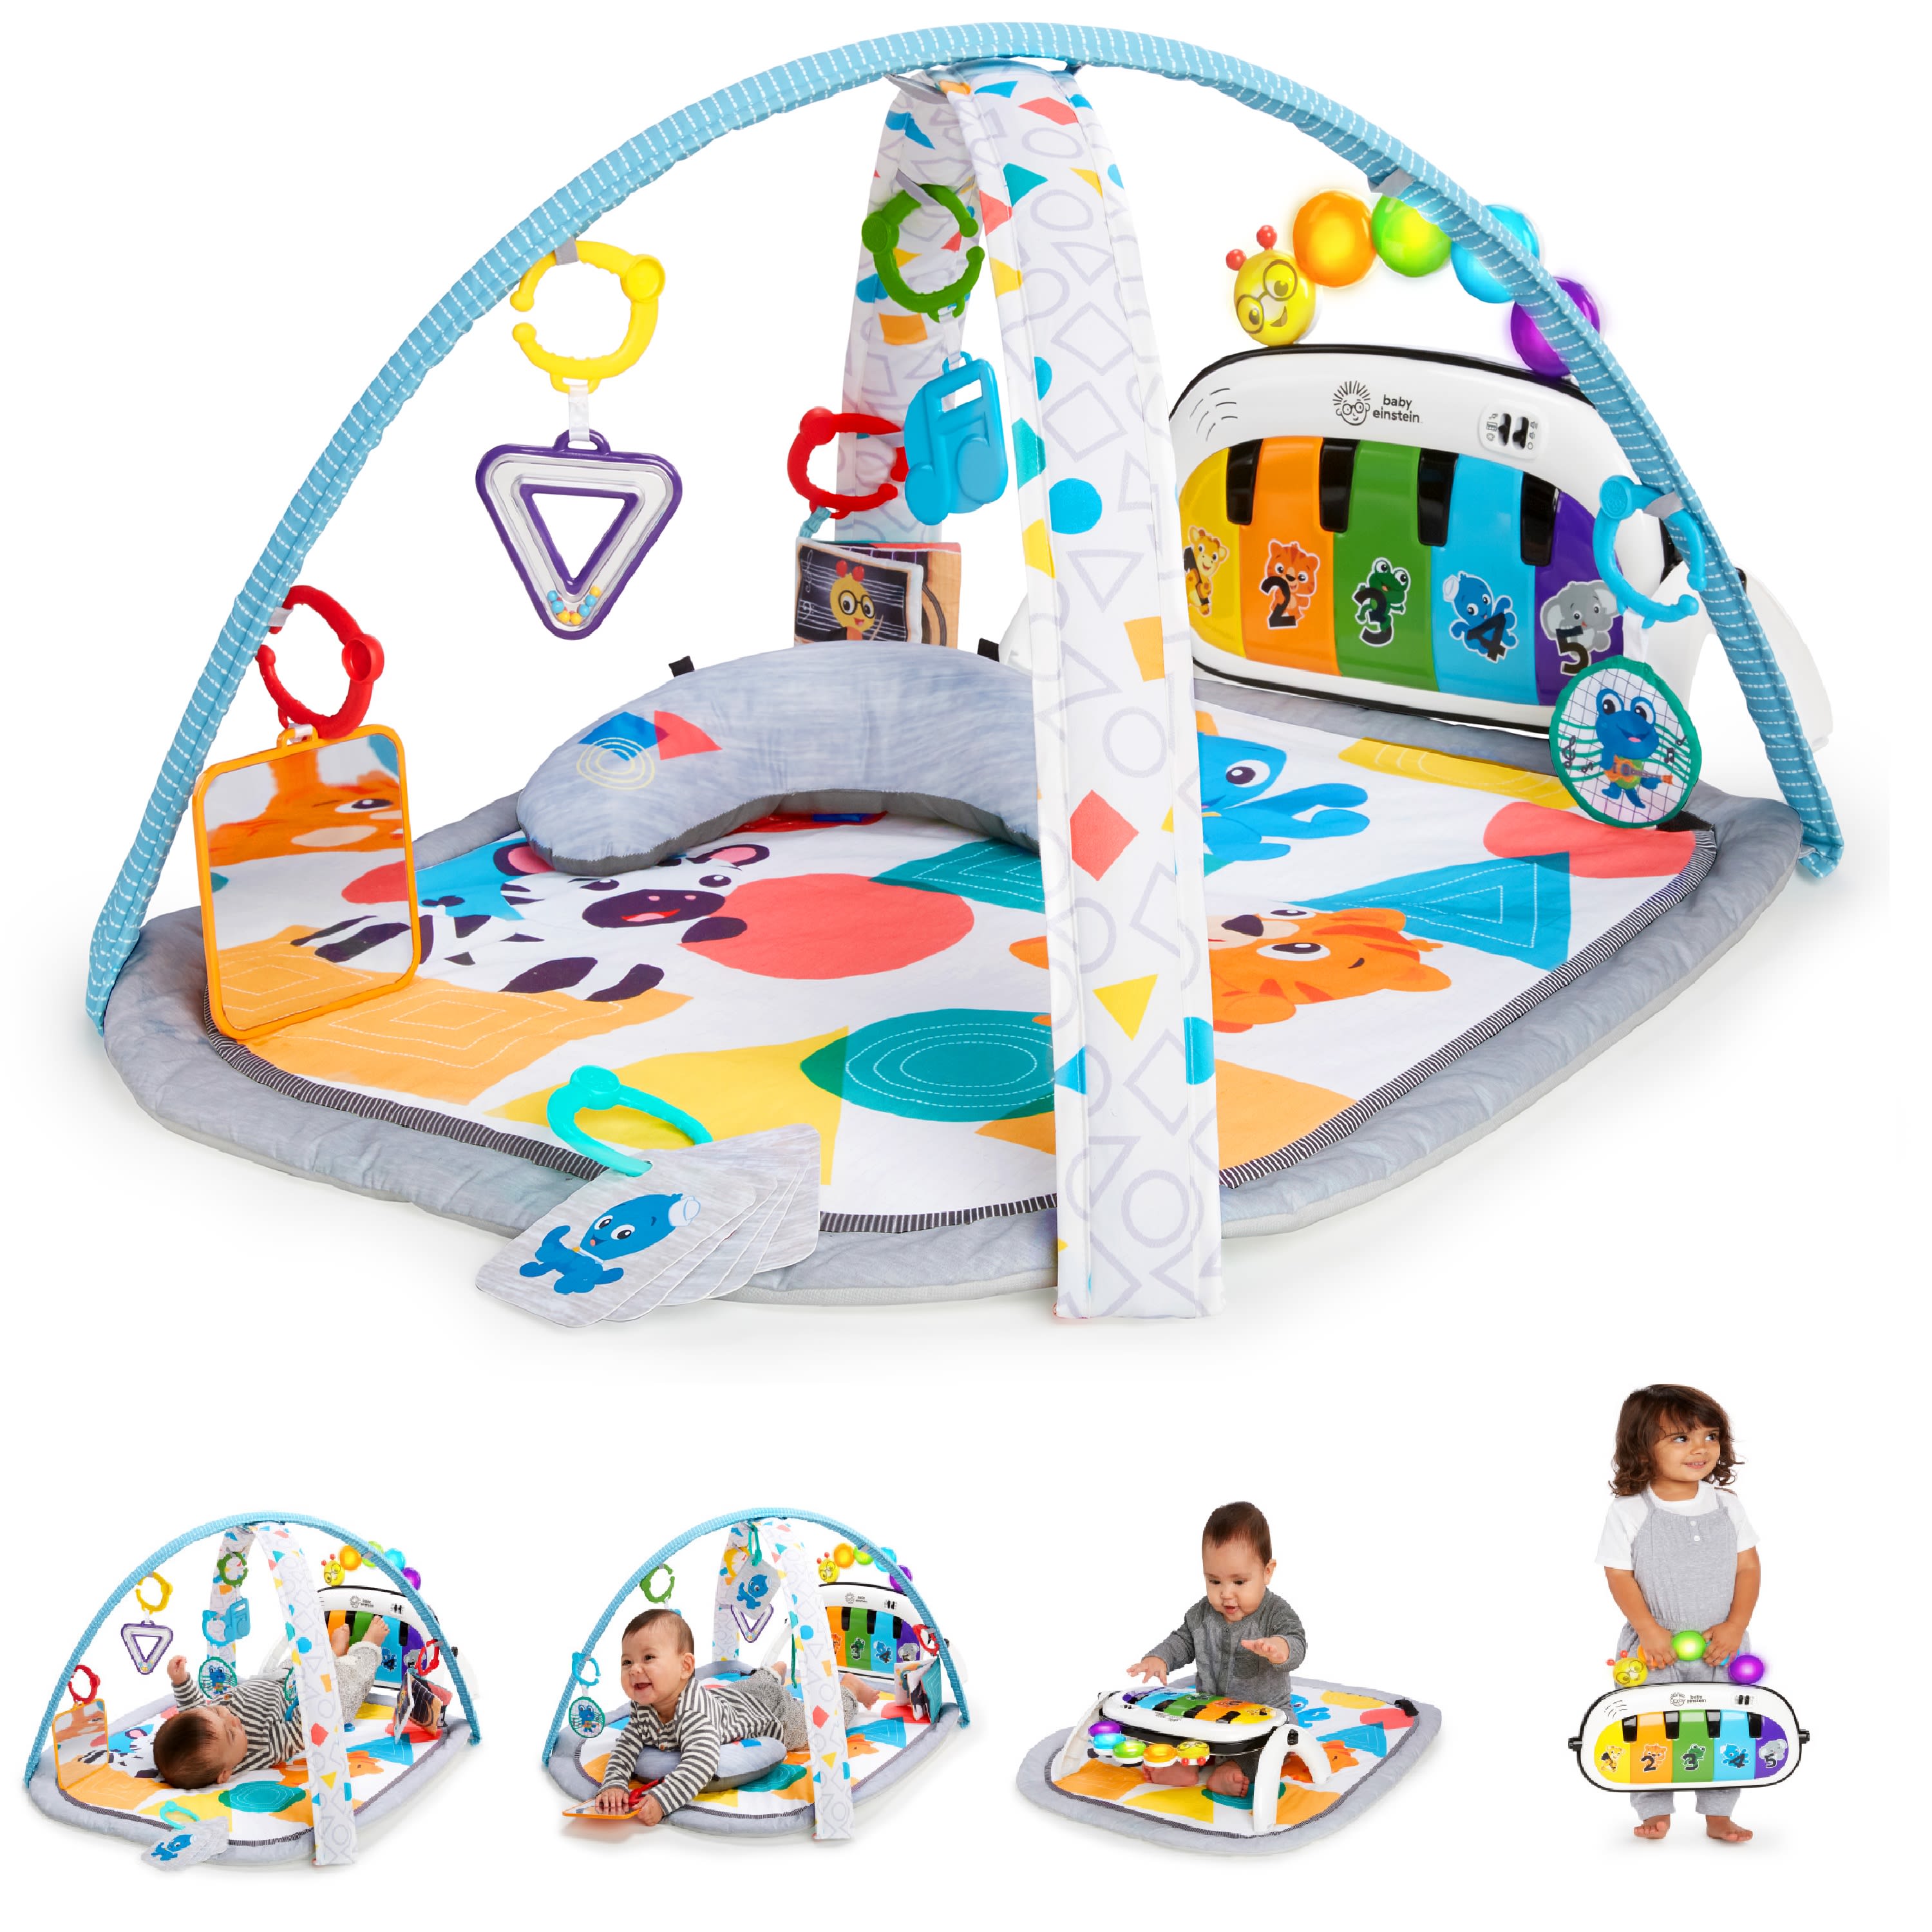 Baby Einstein Kickin' Tunes 4-in-1 Baby Activity Gym & Tummy Time Play Mat with Piano, 0-36 Months, Multicolor - image 1 of 18